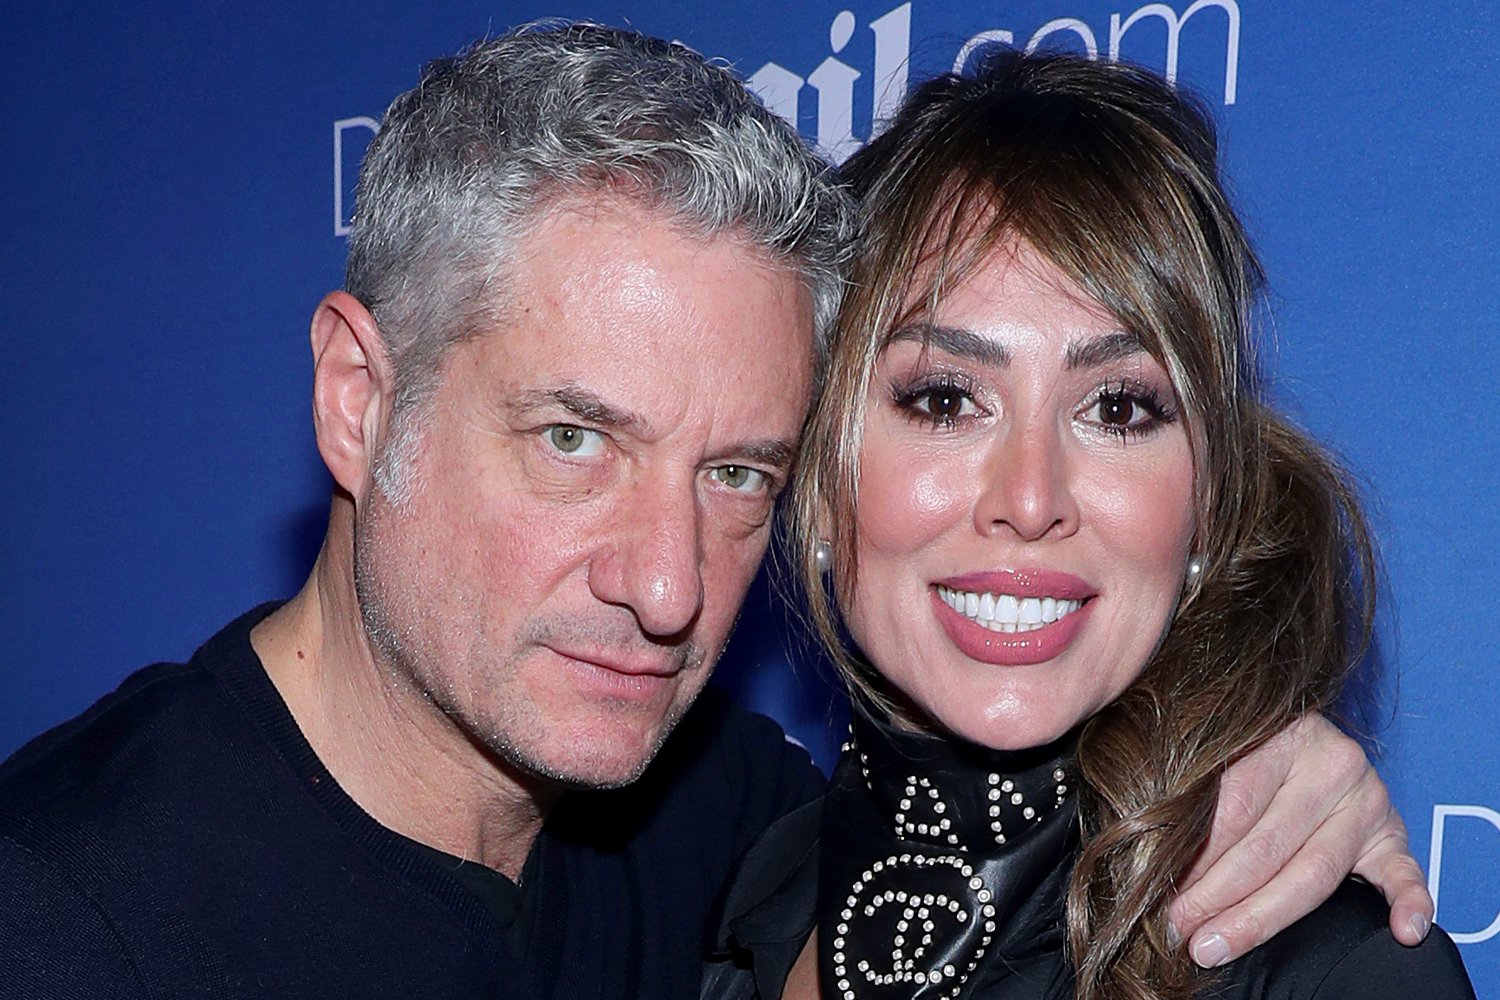 ‘RHOC’ Alum Kelly Dodd Returns ‘Unmasked’ and Launches Podcast With Husband Rick Leventhal